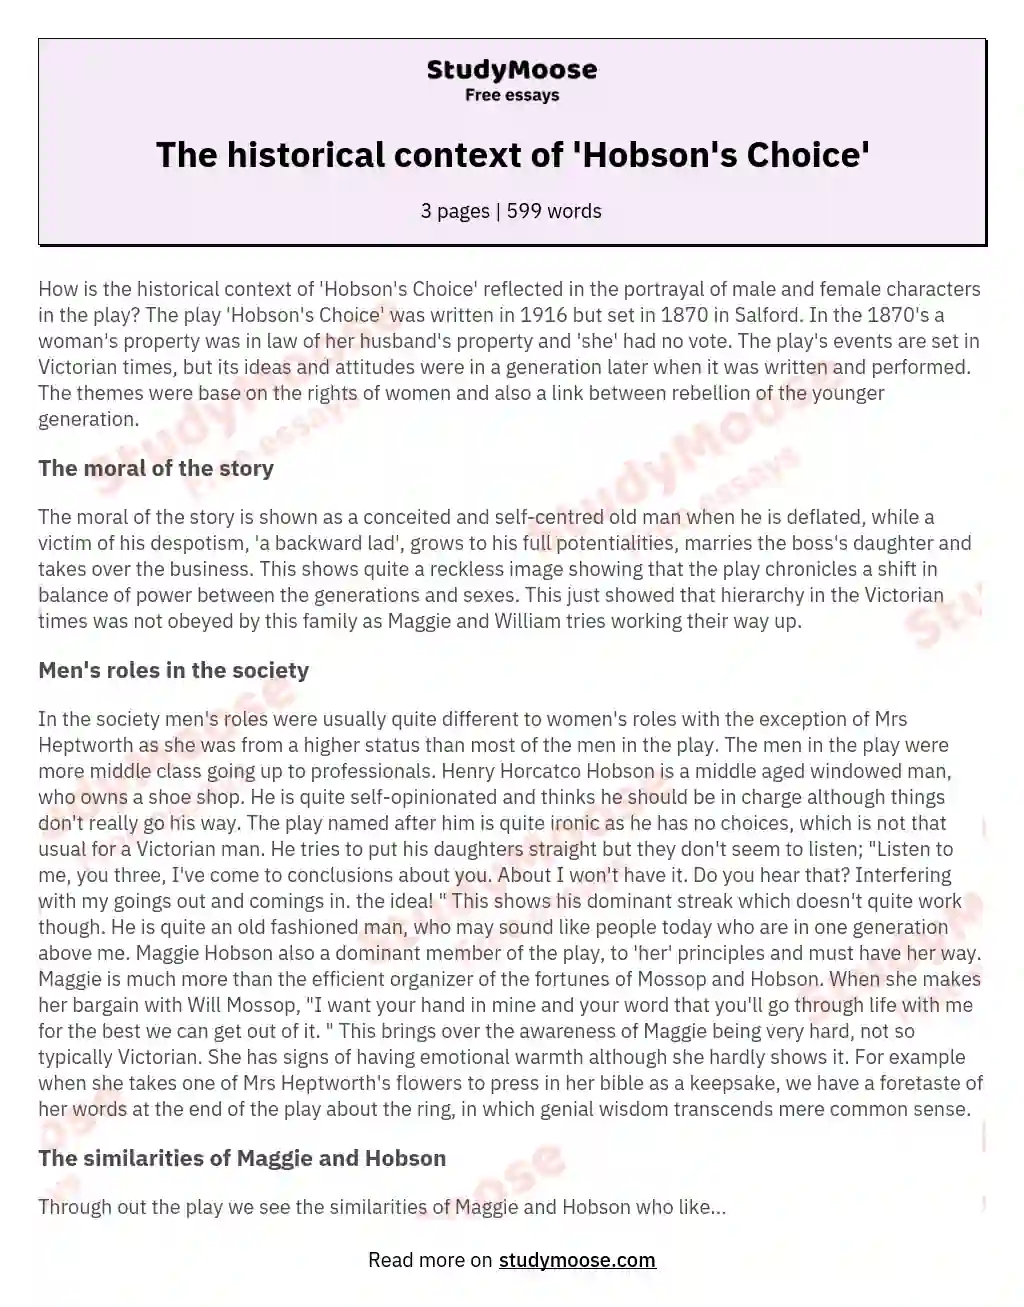 The historical context of 'Hobson's Choice' essay